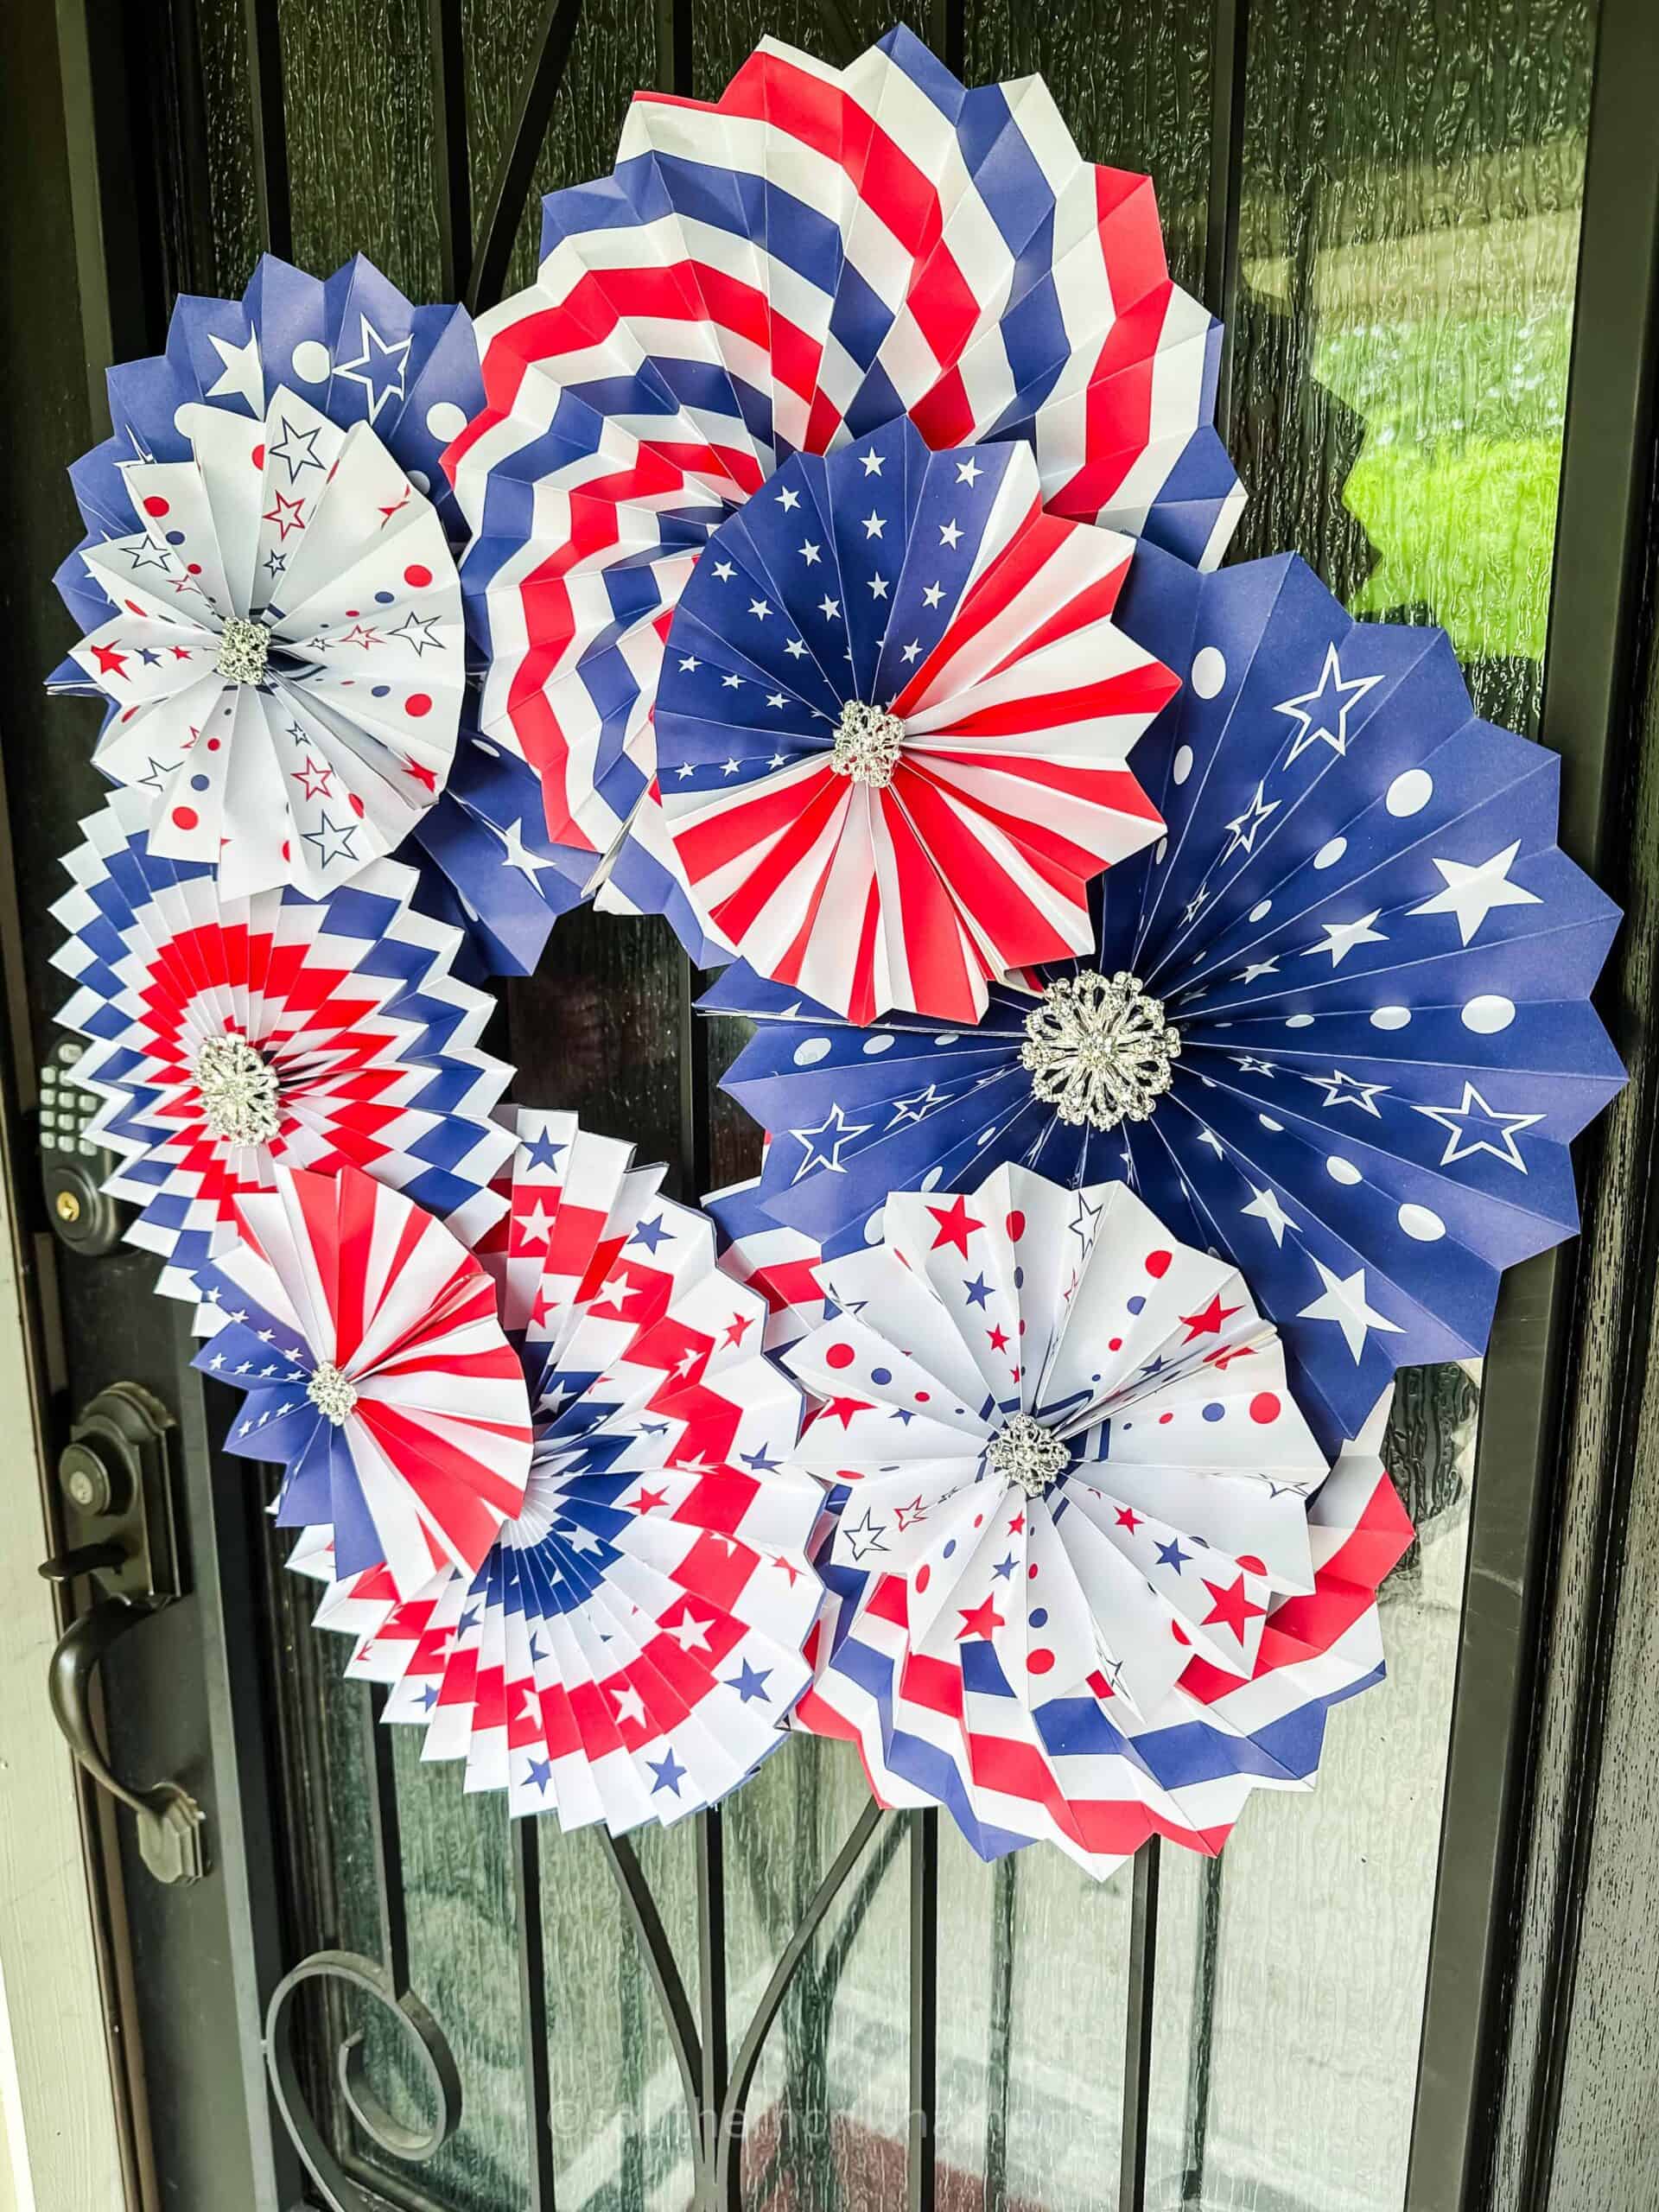 another view of red white and blue paper fan wreath